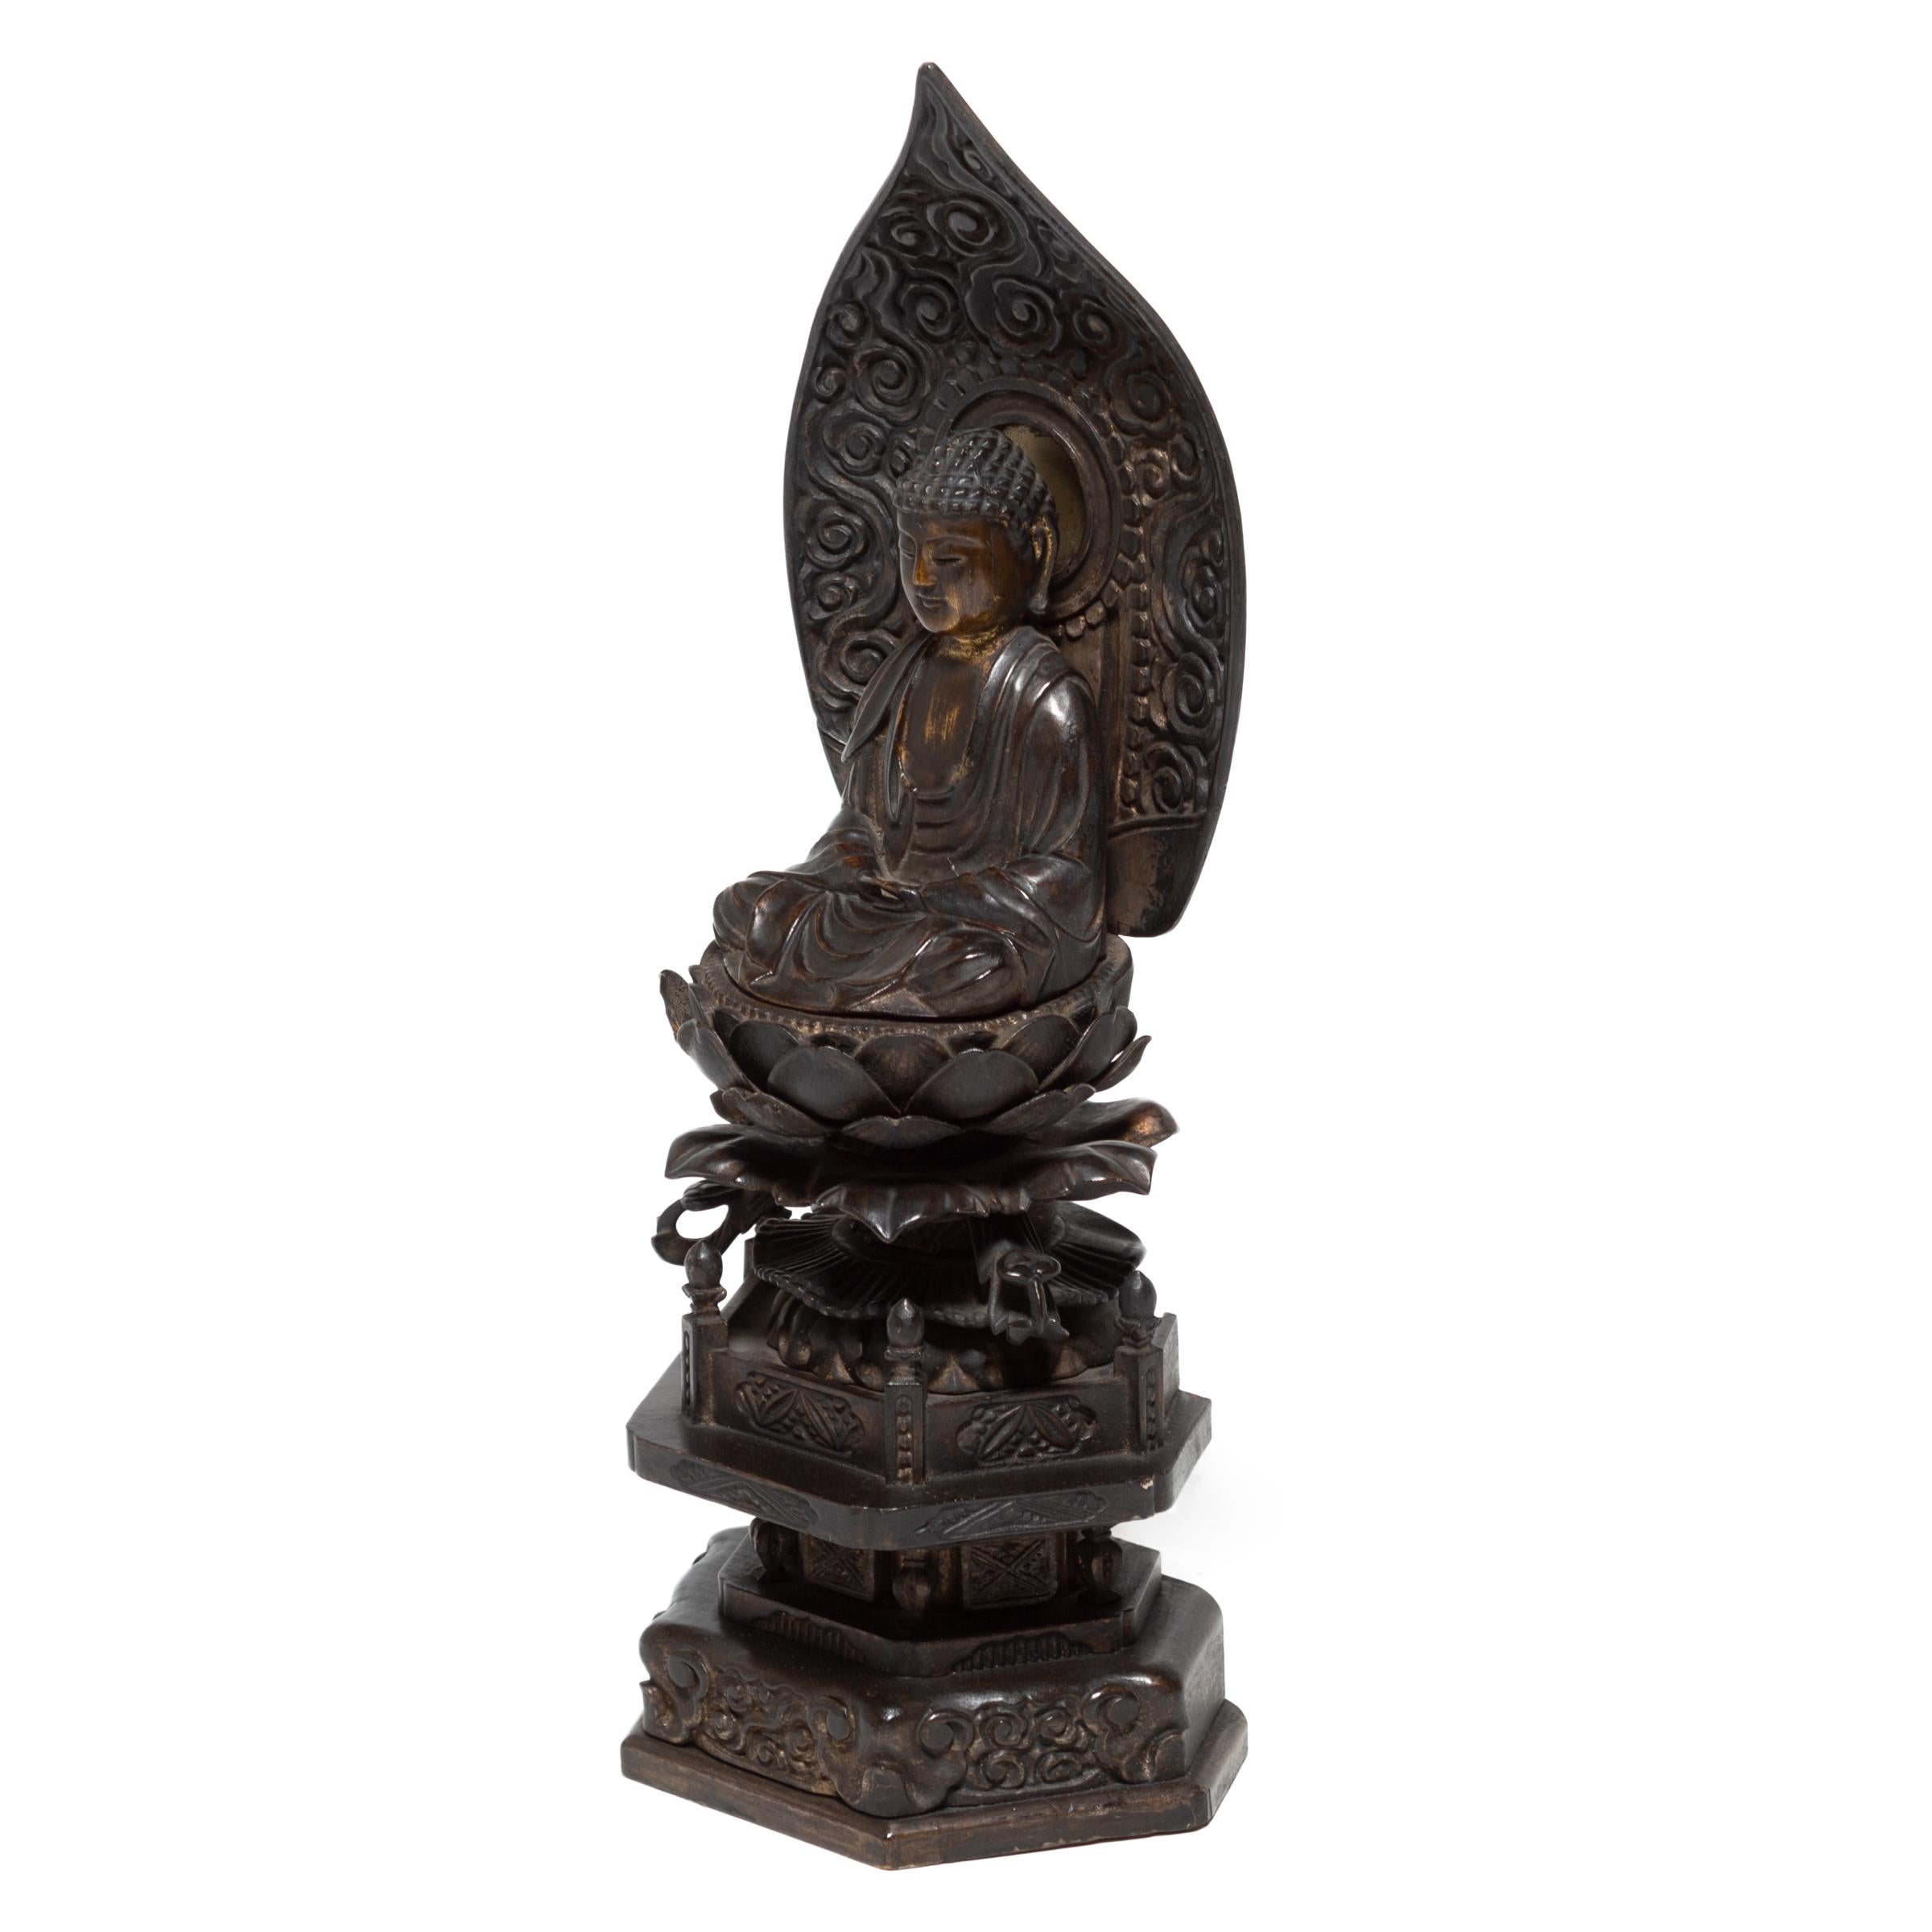 This intricately carved seated figure depicts the Amitābha, the Buddha of Infinite Light. Known also as Amida in Japan, he is the oldest and most important of the five celestial Buddhas of Mahayana Buddhism. Amida symbolizes the transformation of